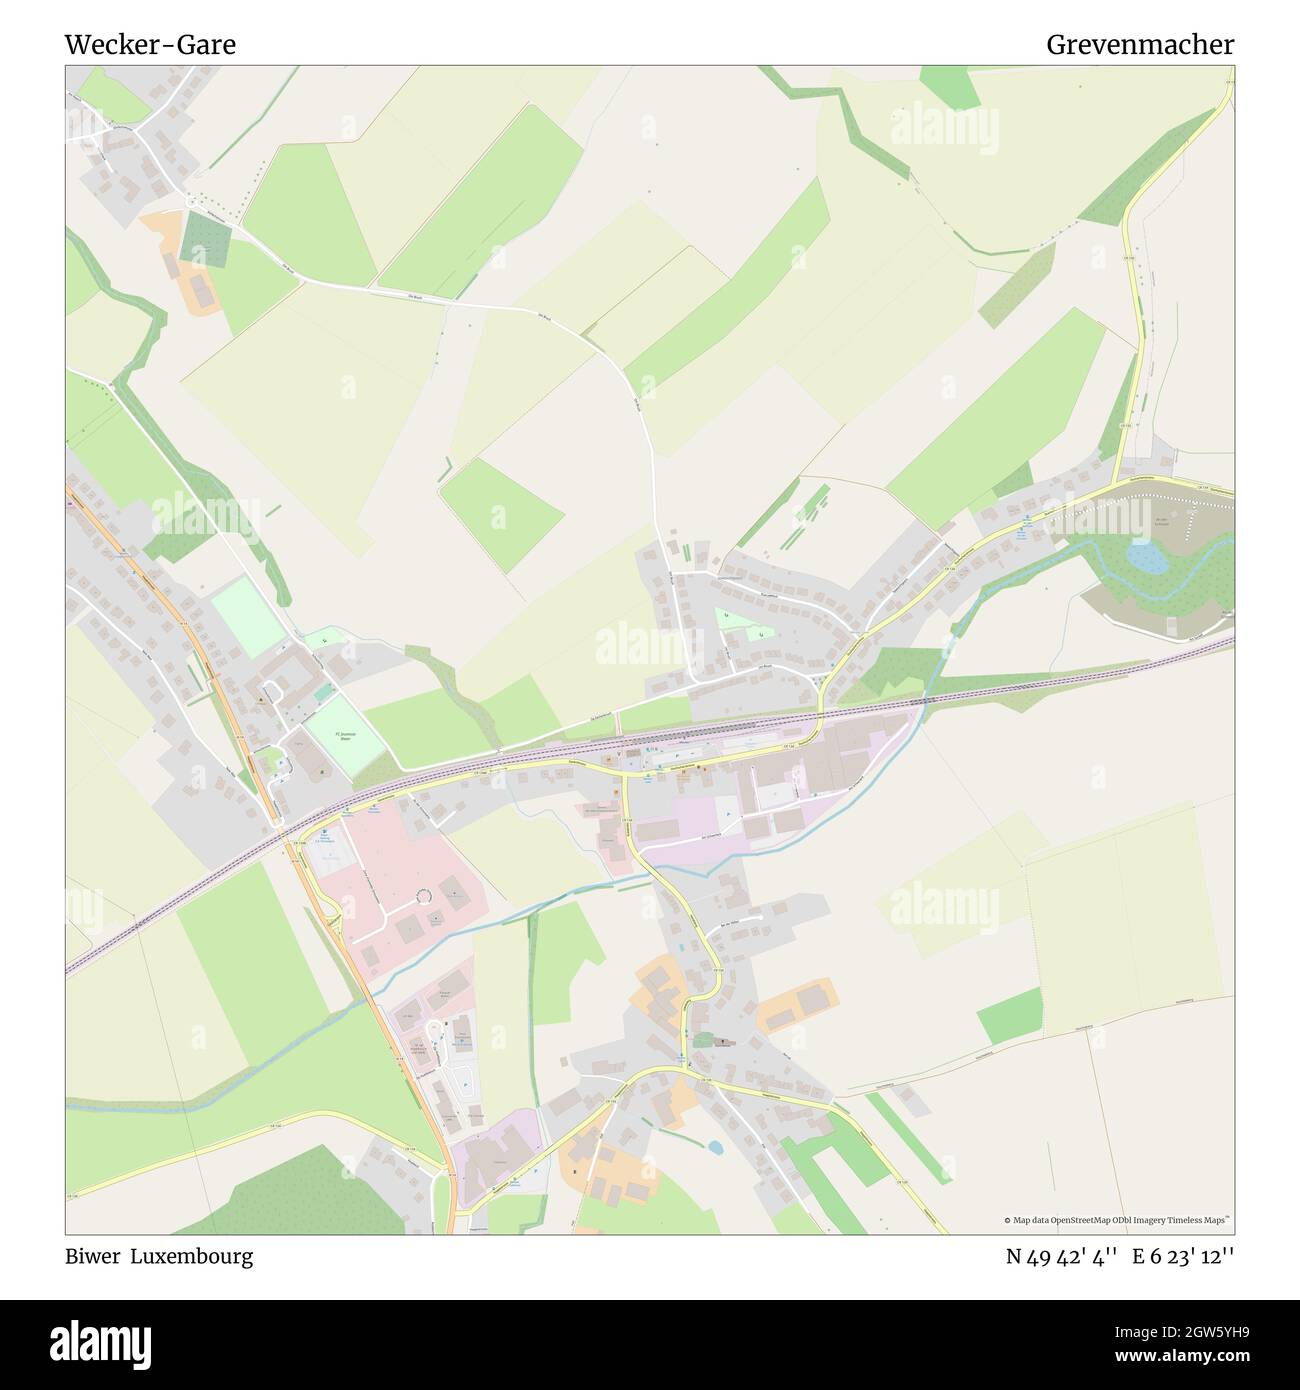 Wecker-Gare, Biwer, Luxembourg, Grevenmacher, N 49 42' 4'', E 6 23' 12'', map, Timeless Map published in 2021. Travelers, explorers and adventurers like Florence Nightingale, David Livingstone, Ernest Shackleton, Lewis and Clark and Sherlock Holmes relied on maps to plan travels to the world's most remote corners, Timeless Maps is mapping most locations on the globe, showing the achievement of great dreams Stock Photo